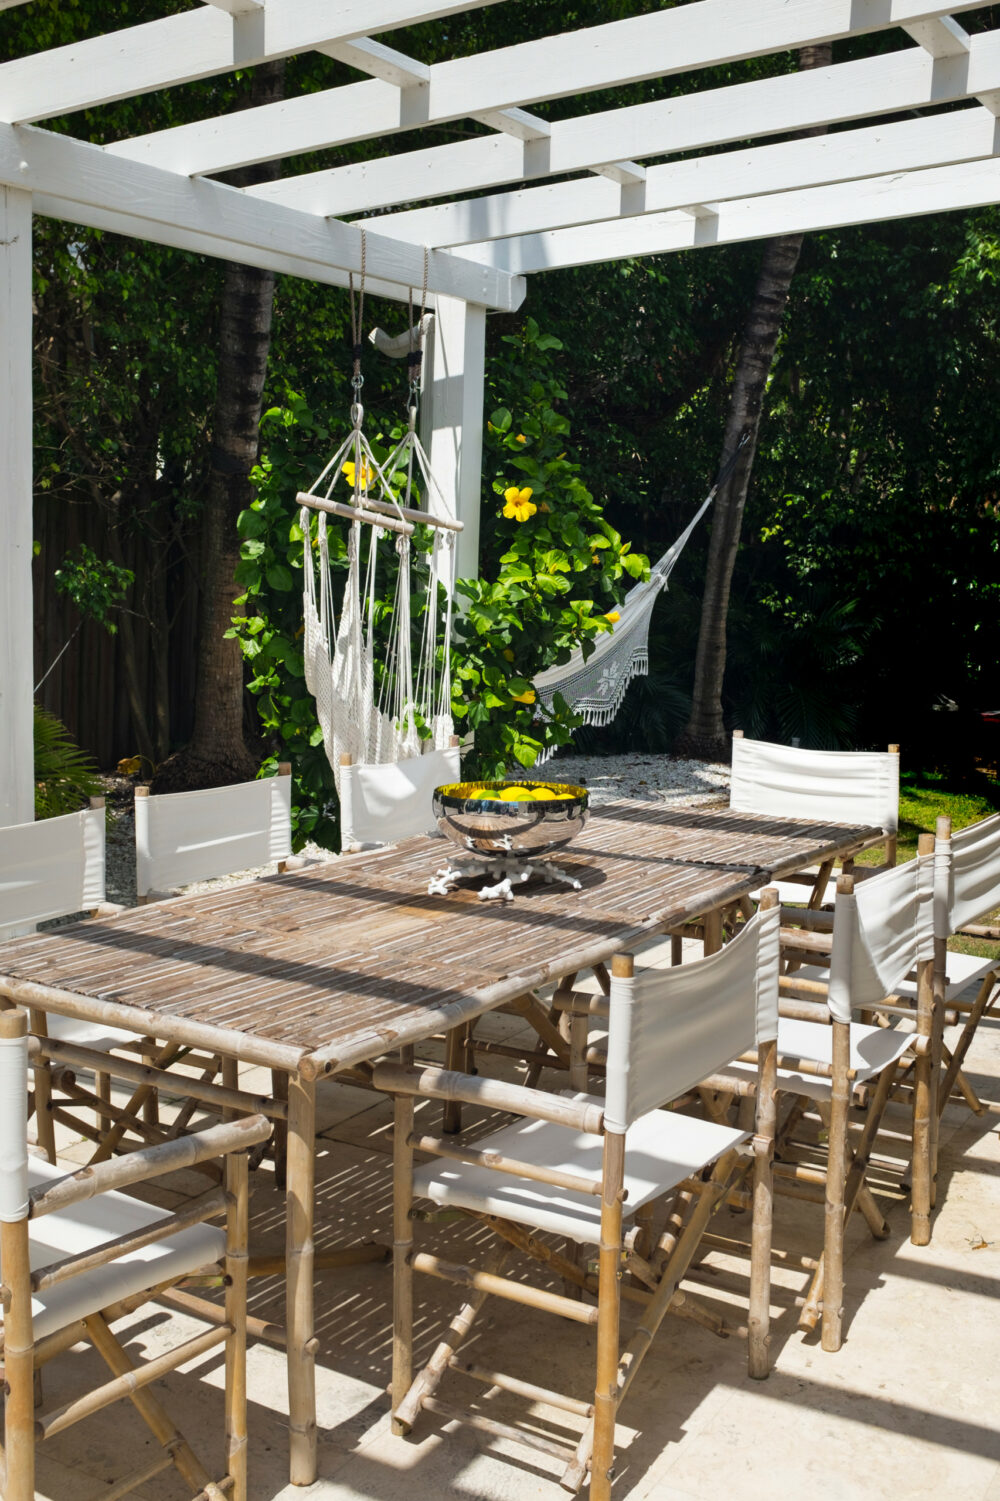 1-70 Rustic Charm Outdoors: Shabby Chic Patio Ideas